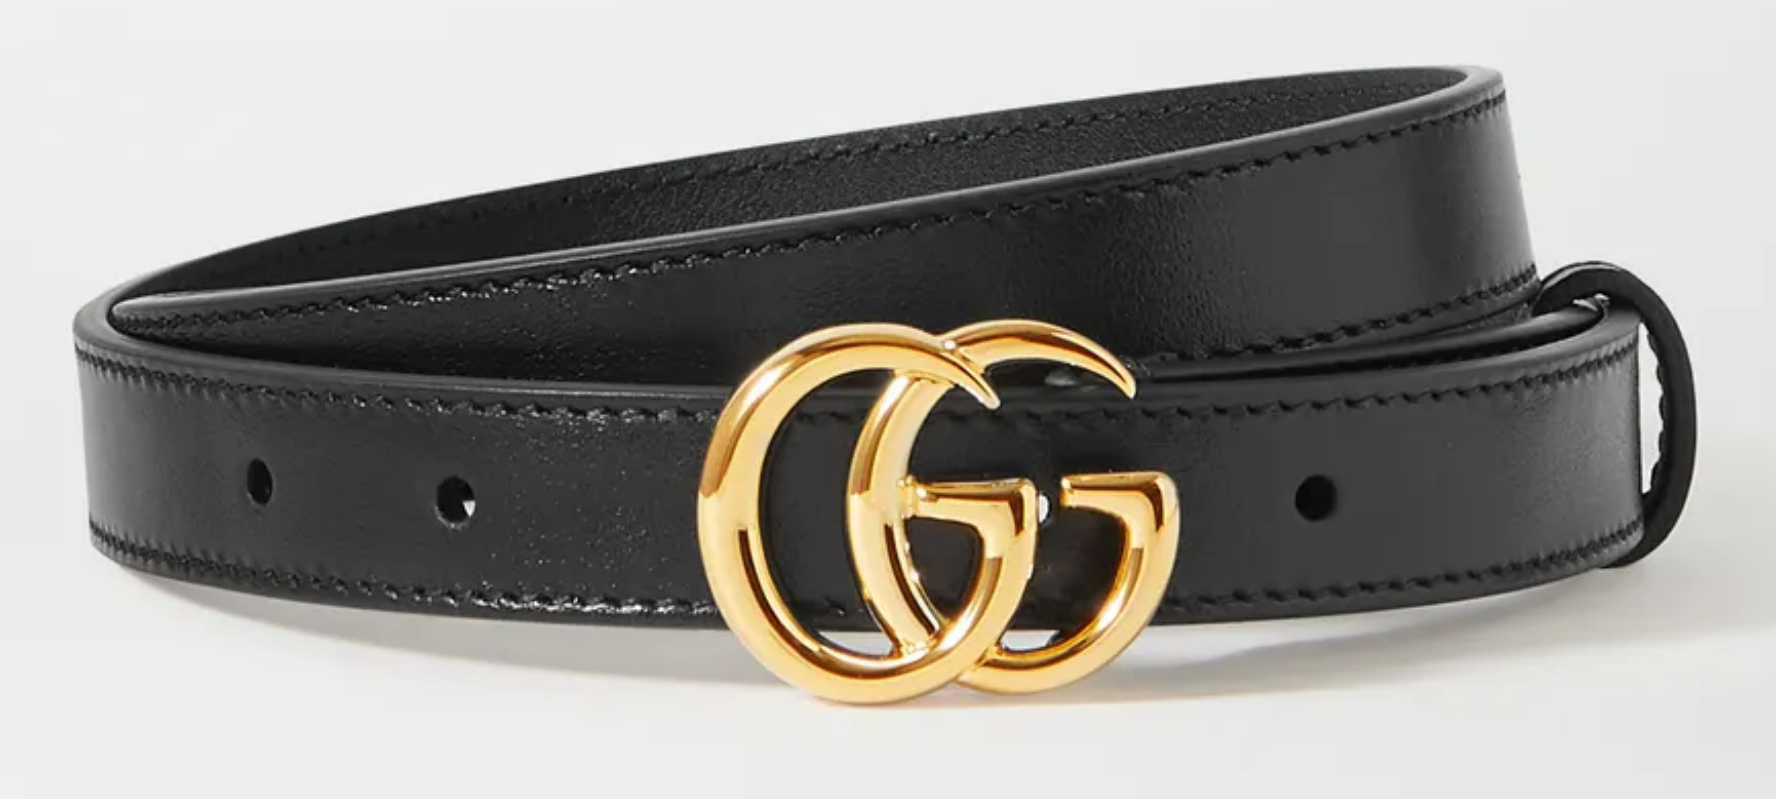 Versions of the GG Marmont belt start at £320